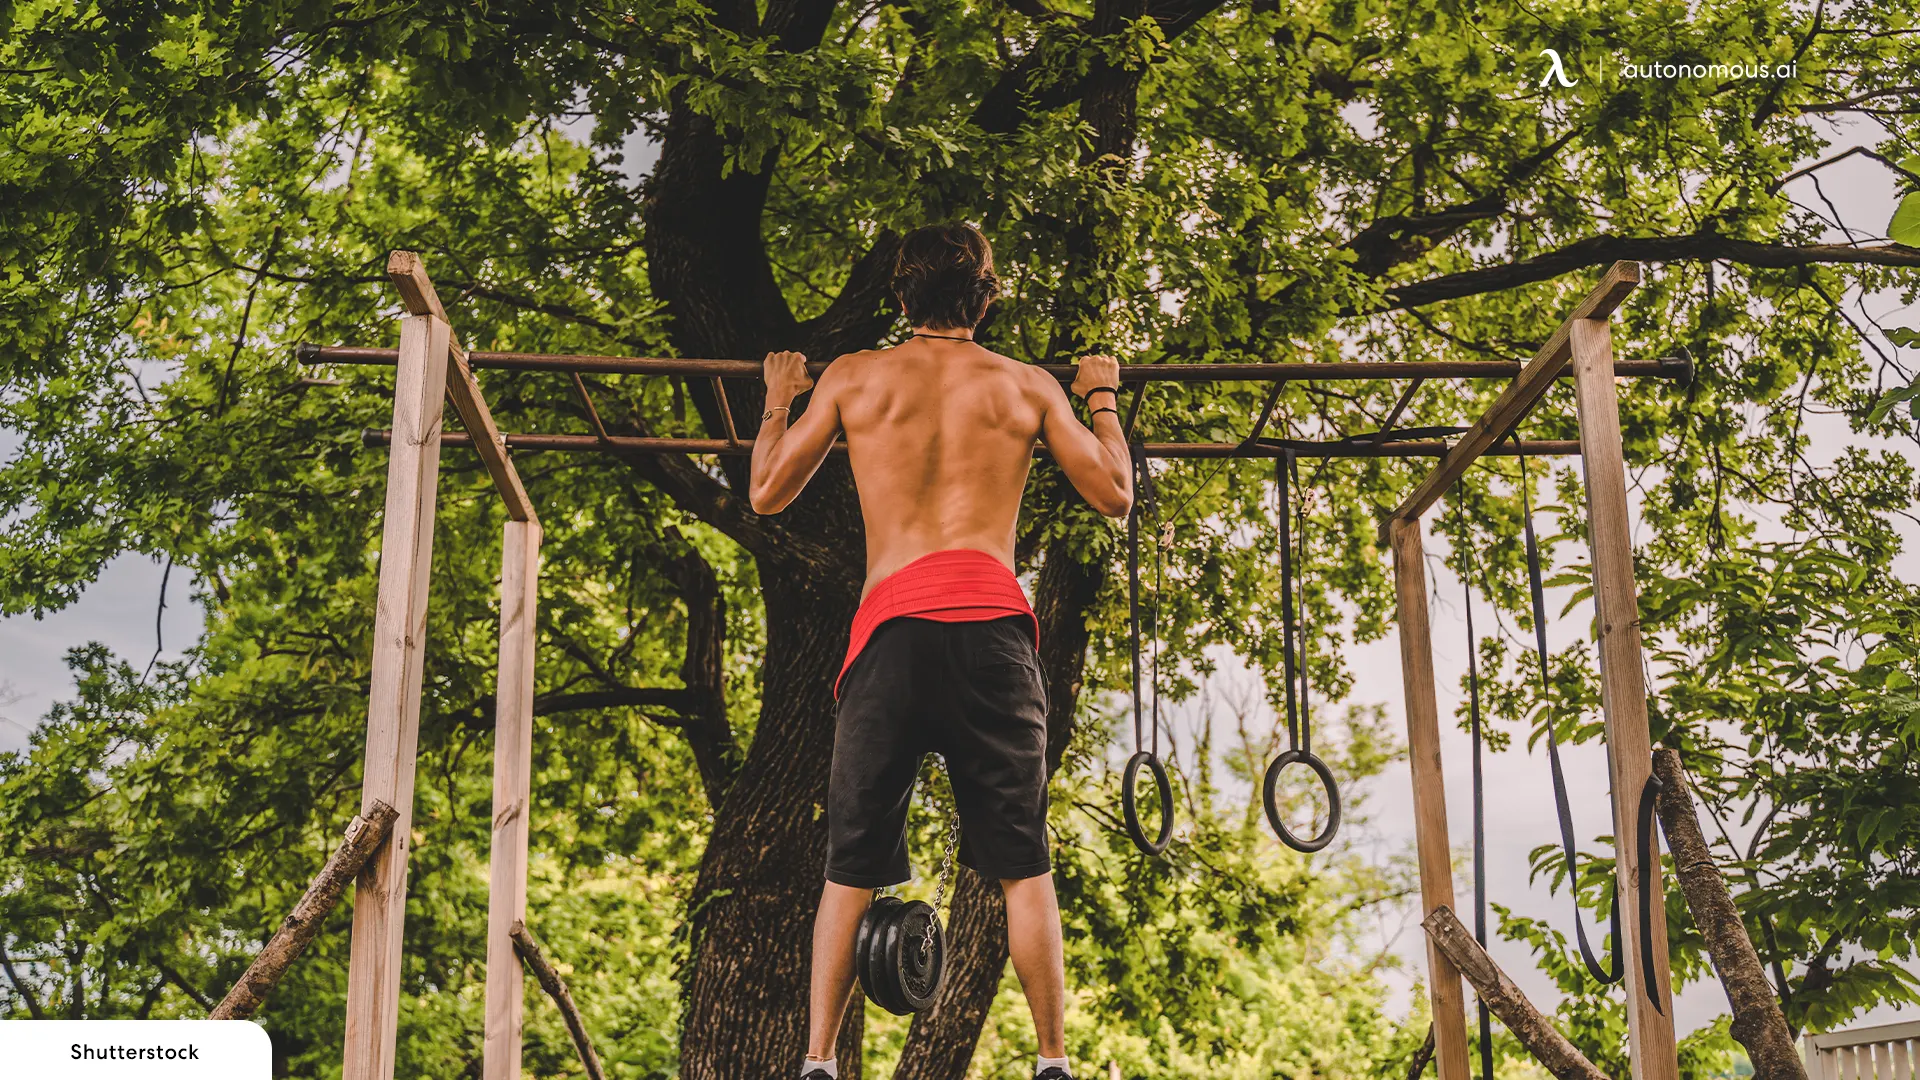 Build It Yourself - DIY Power Rack for Outdoor Gyms